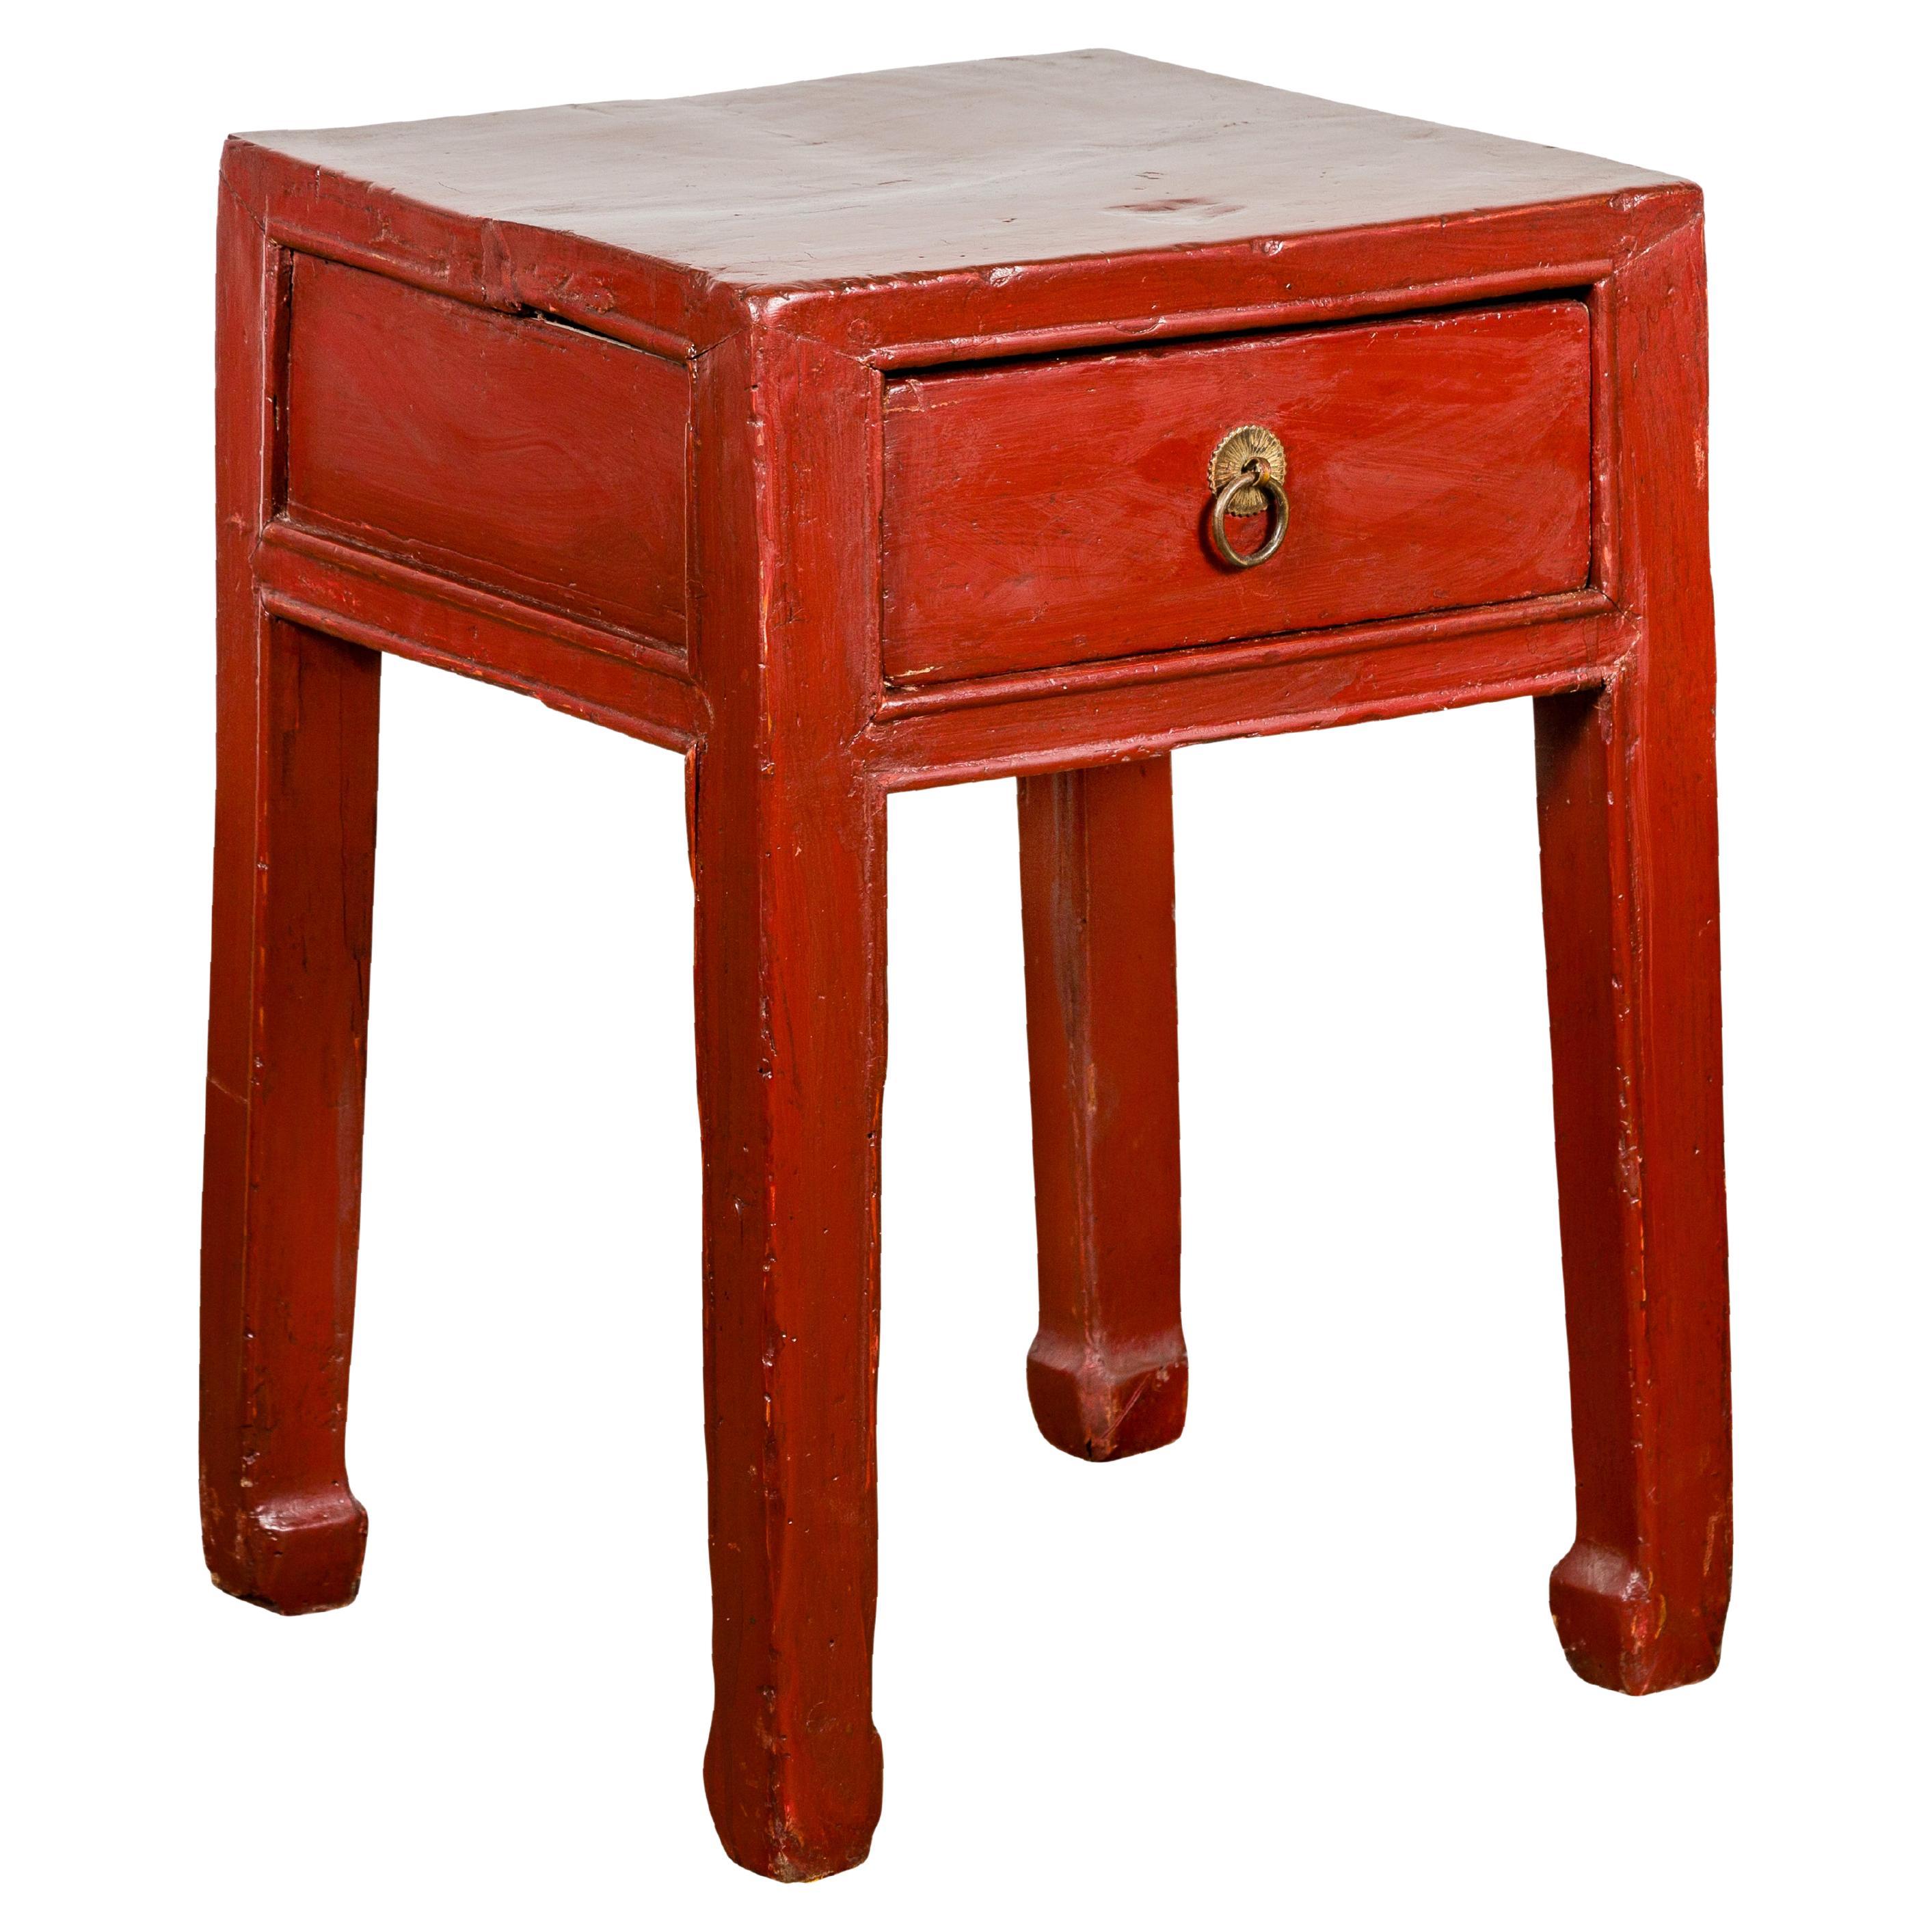 Late Qing Dynasty Red Lacquer Side Table with Single Drawer and Horse Hoof Feet For Sale